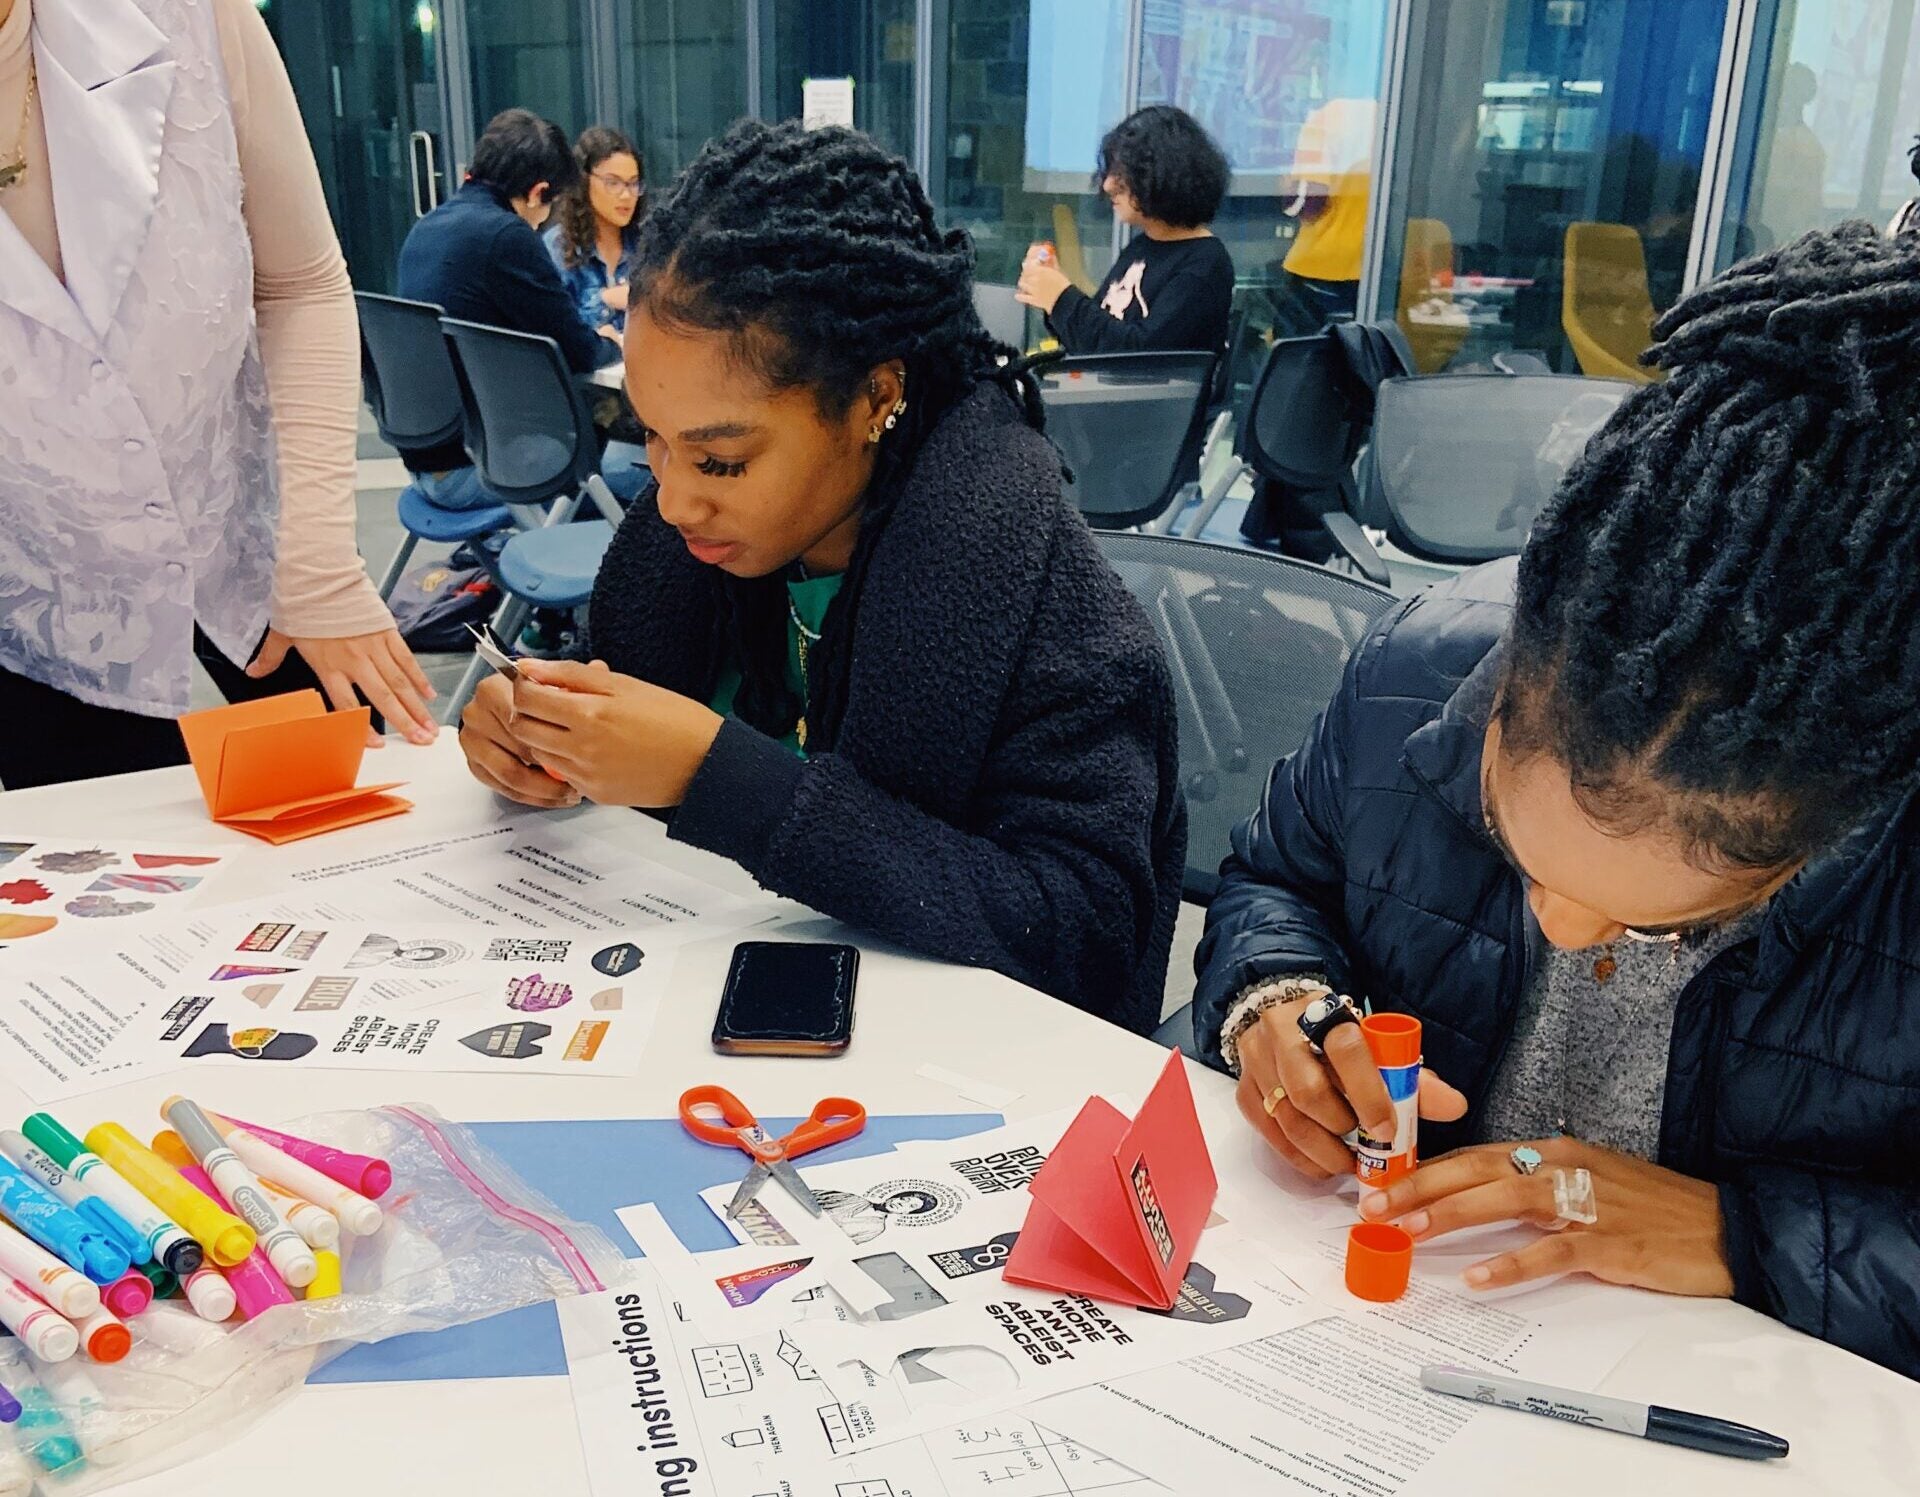 Young women make zines with paper, markers, glue and scissors spread out in front of them.